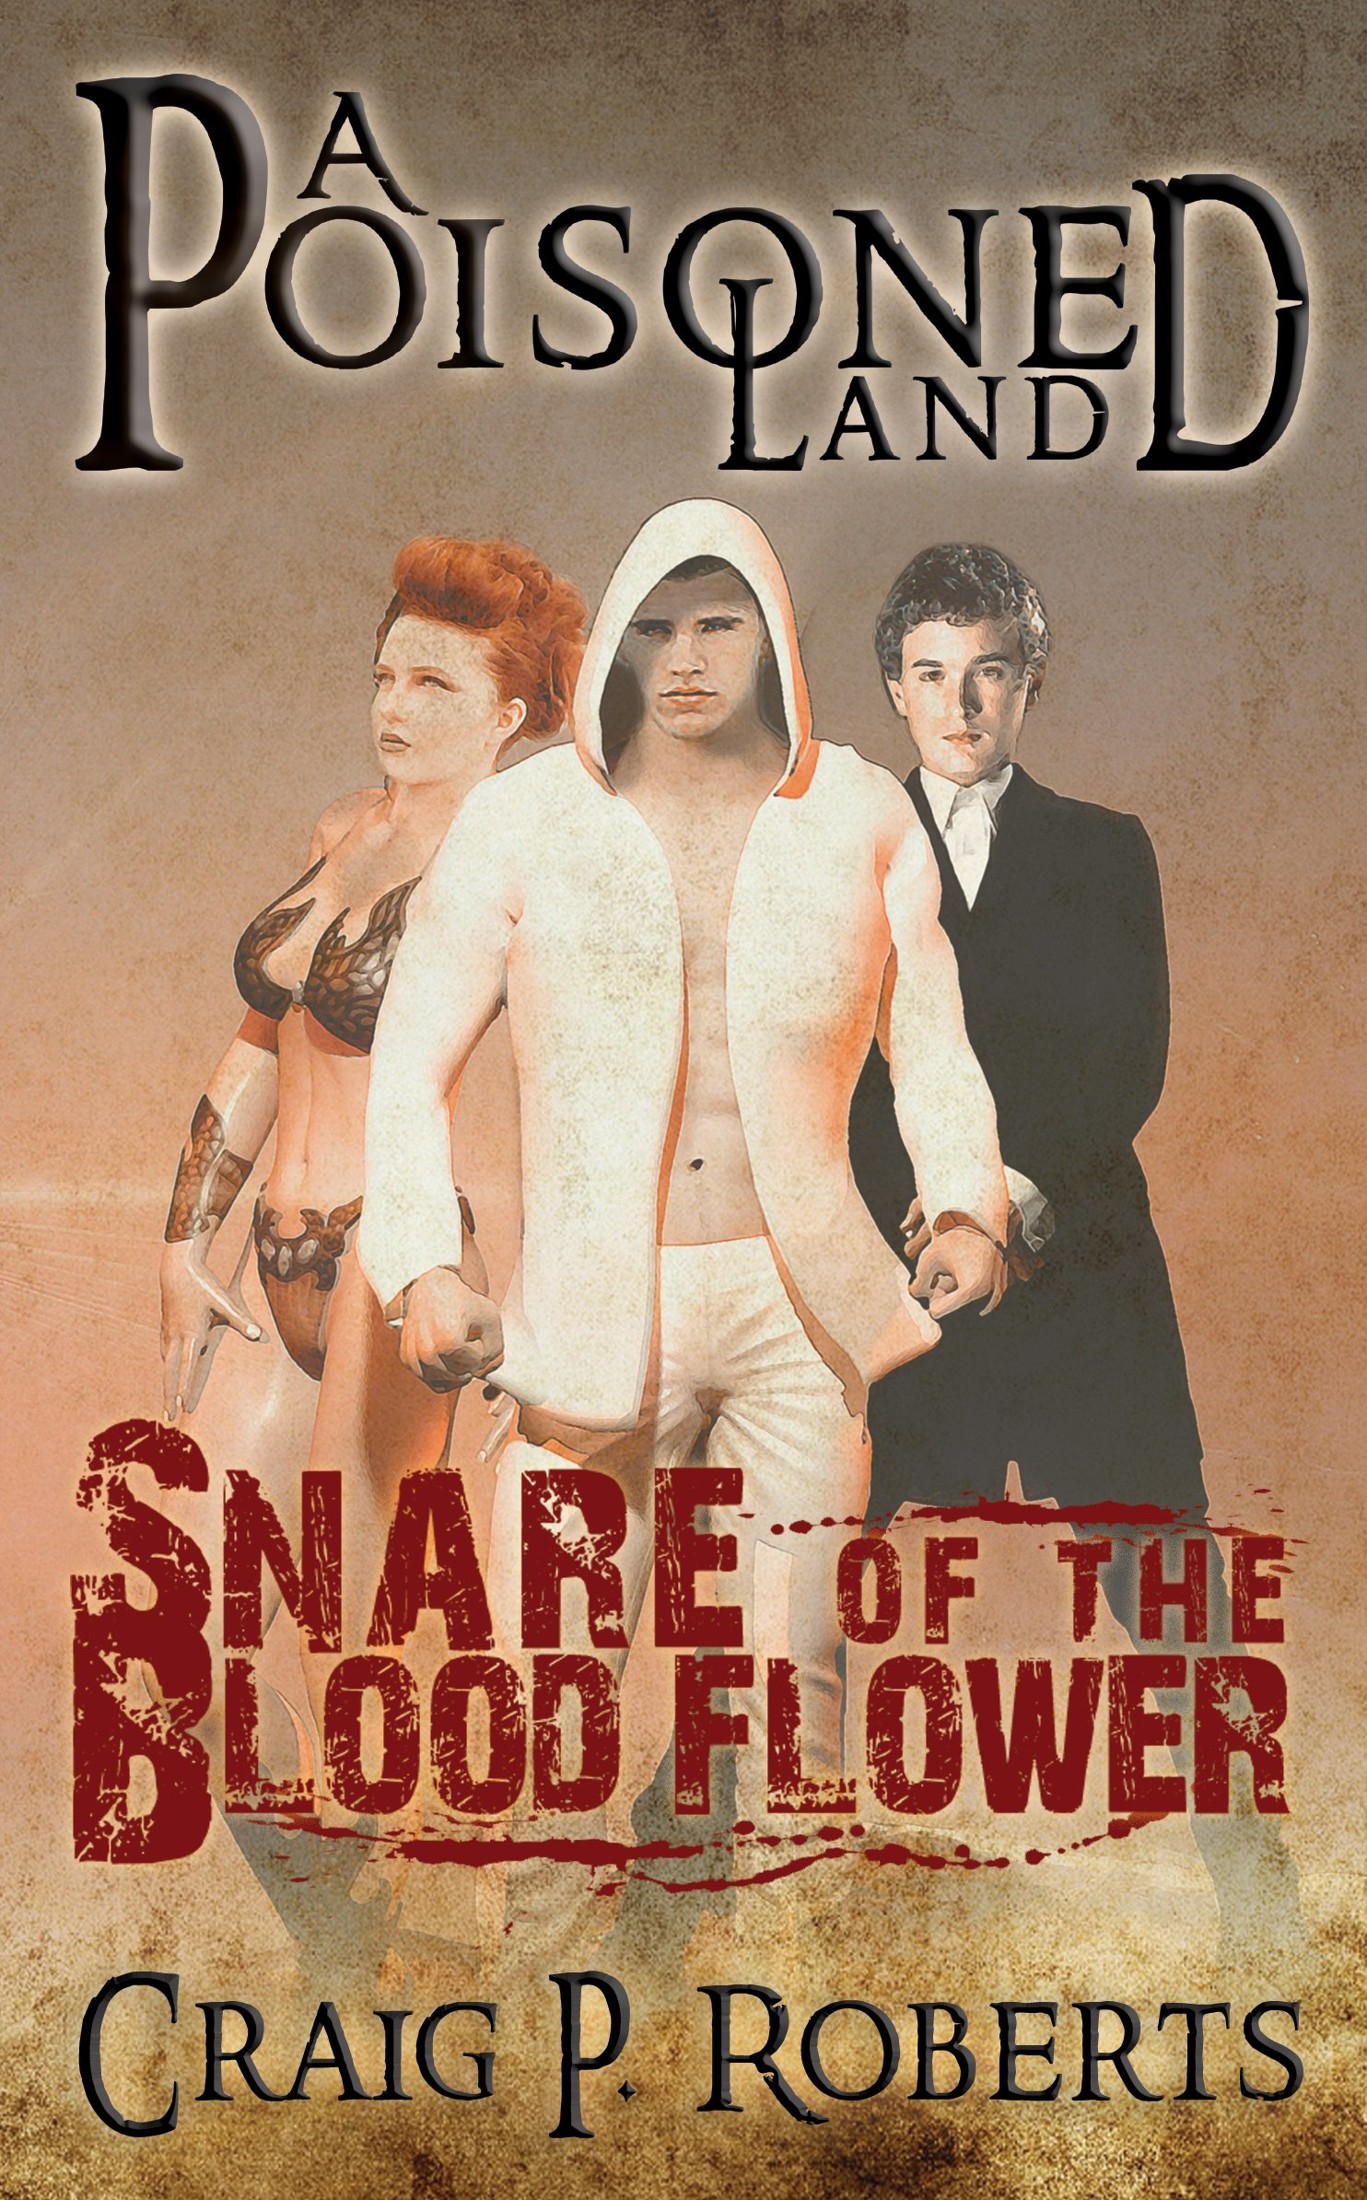 Snare of the Blood Flower: A Novella From a Poisoned Land